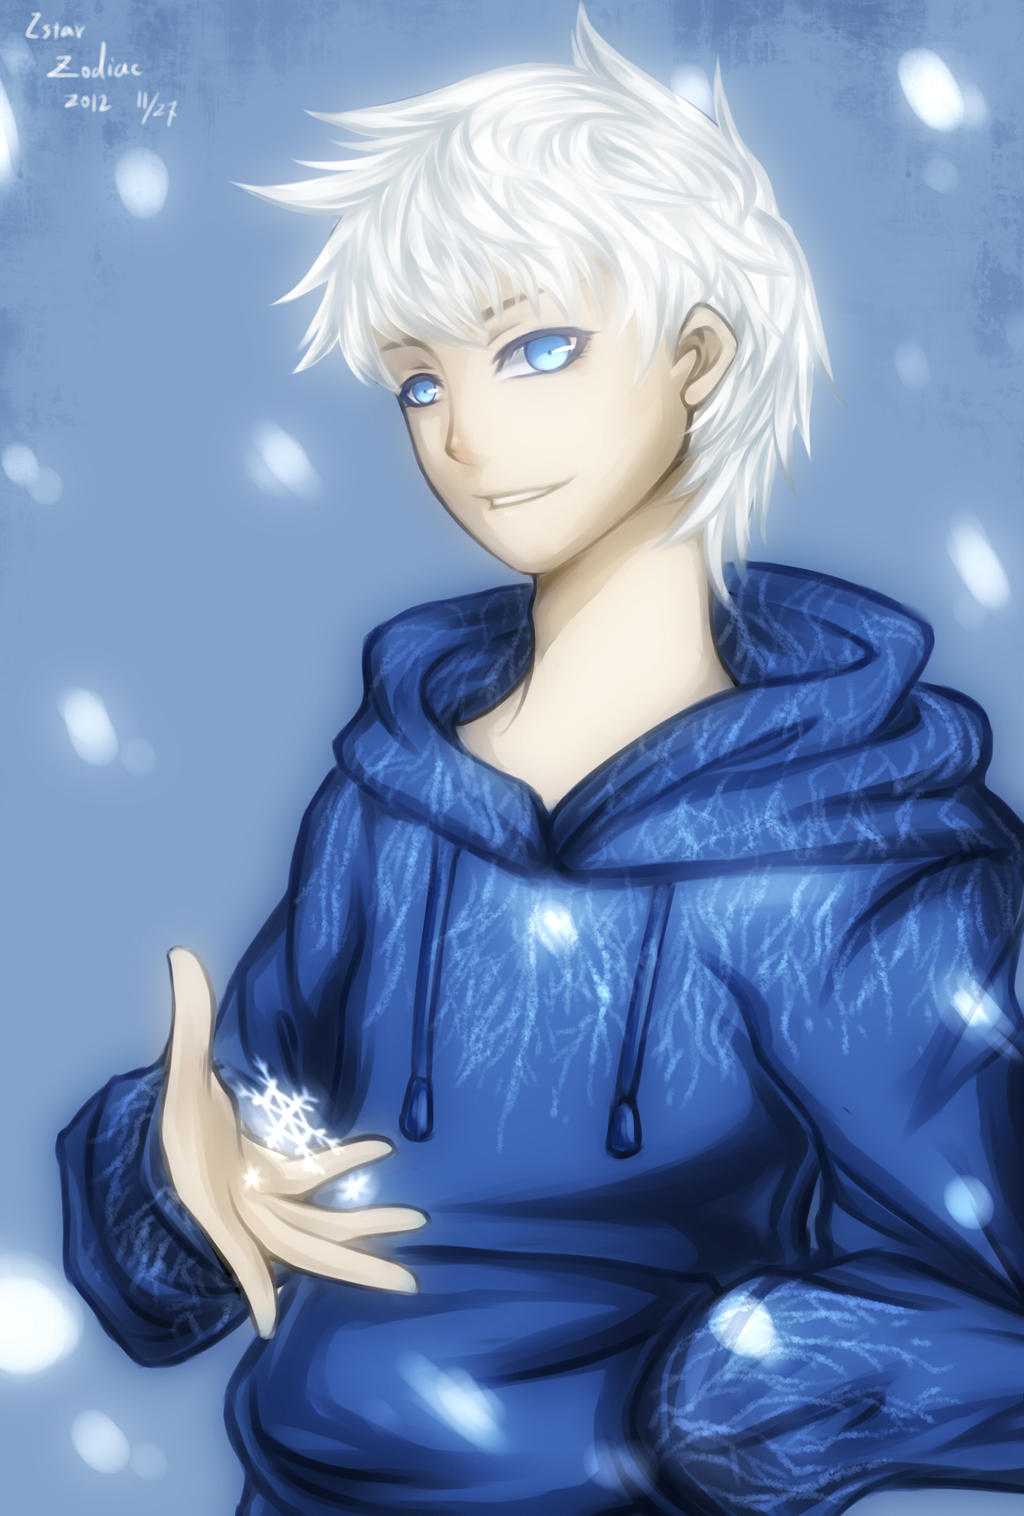 anime frost